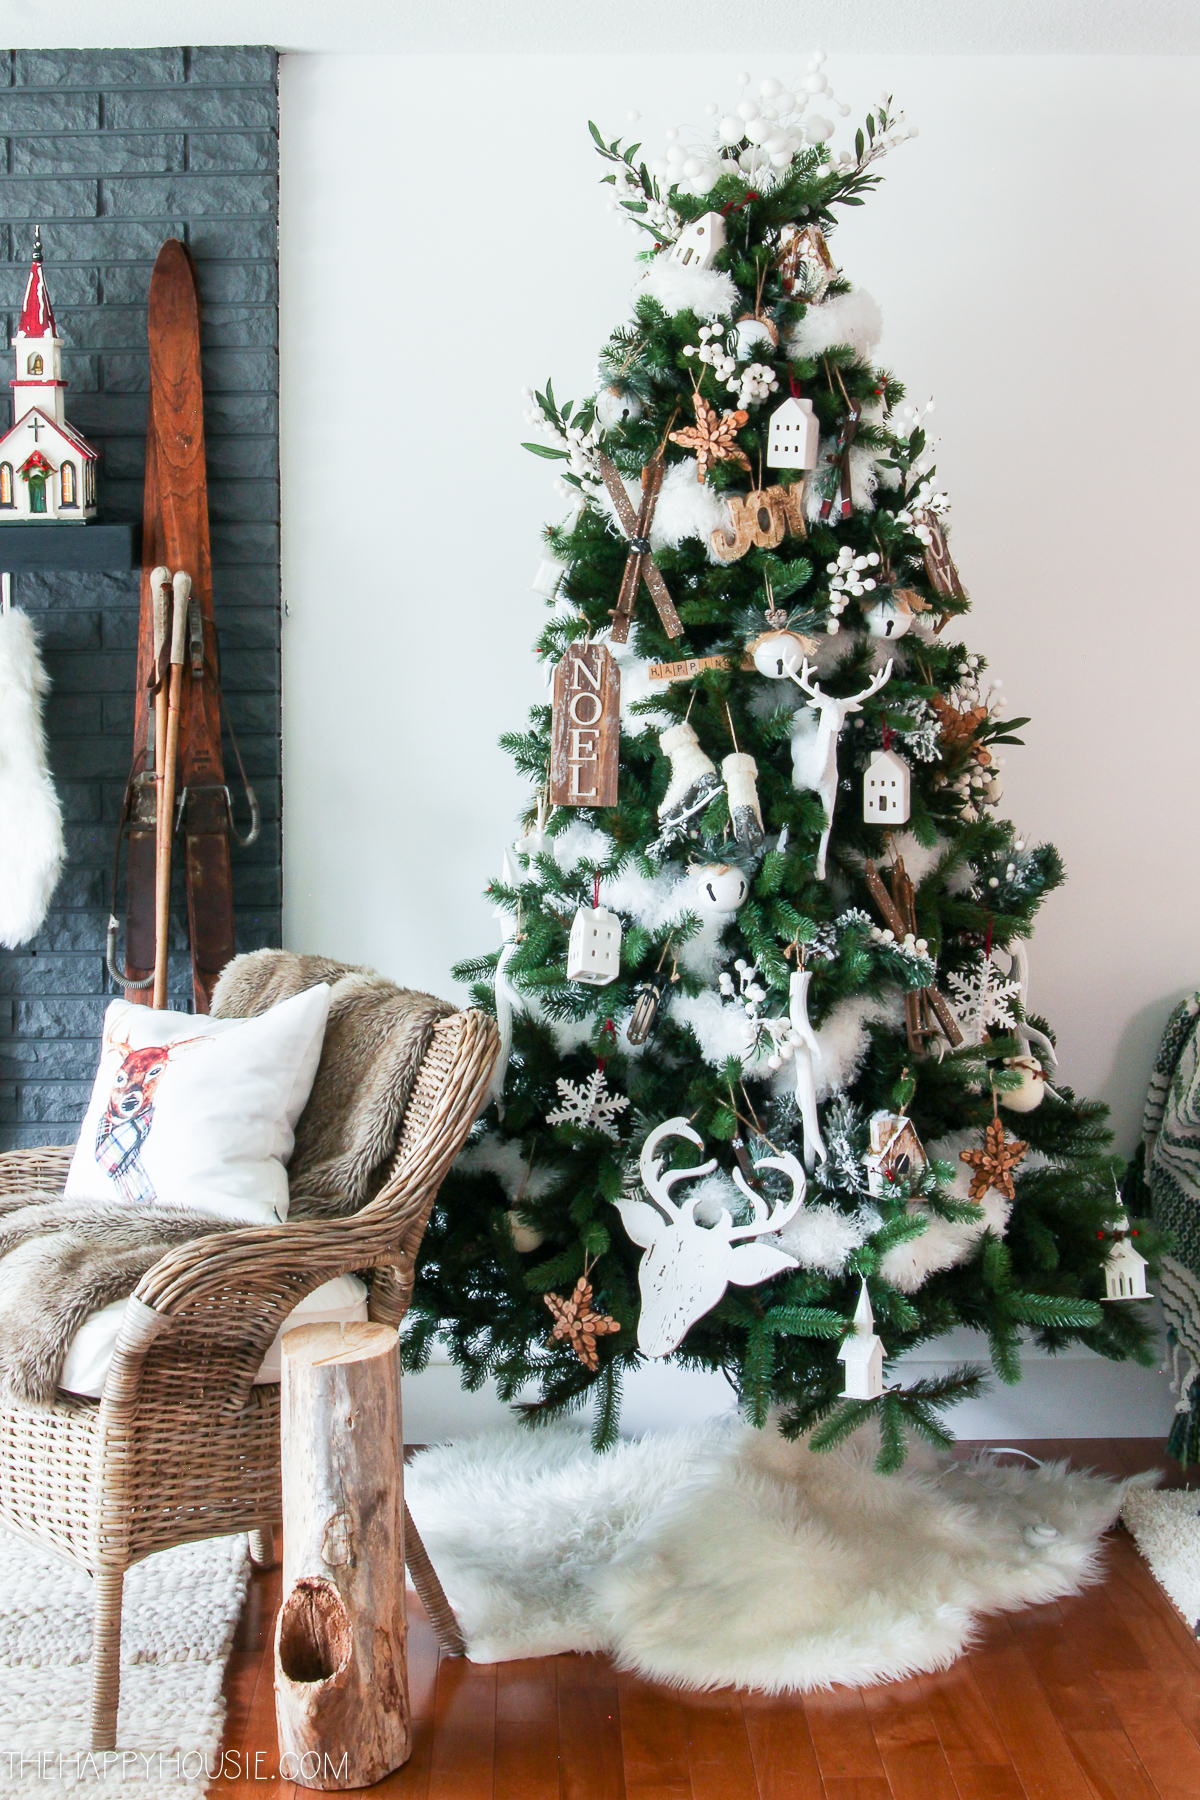 A small Christmas tree is in the corner of the room with a faux fur white skirt.